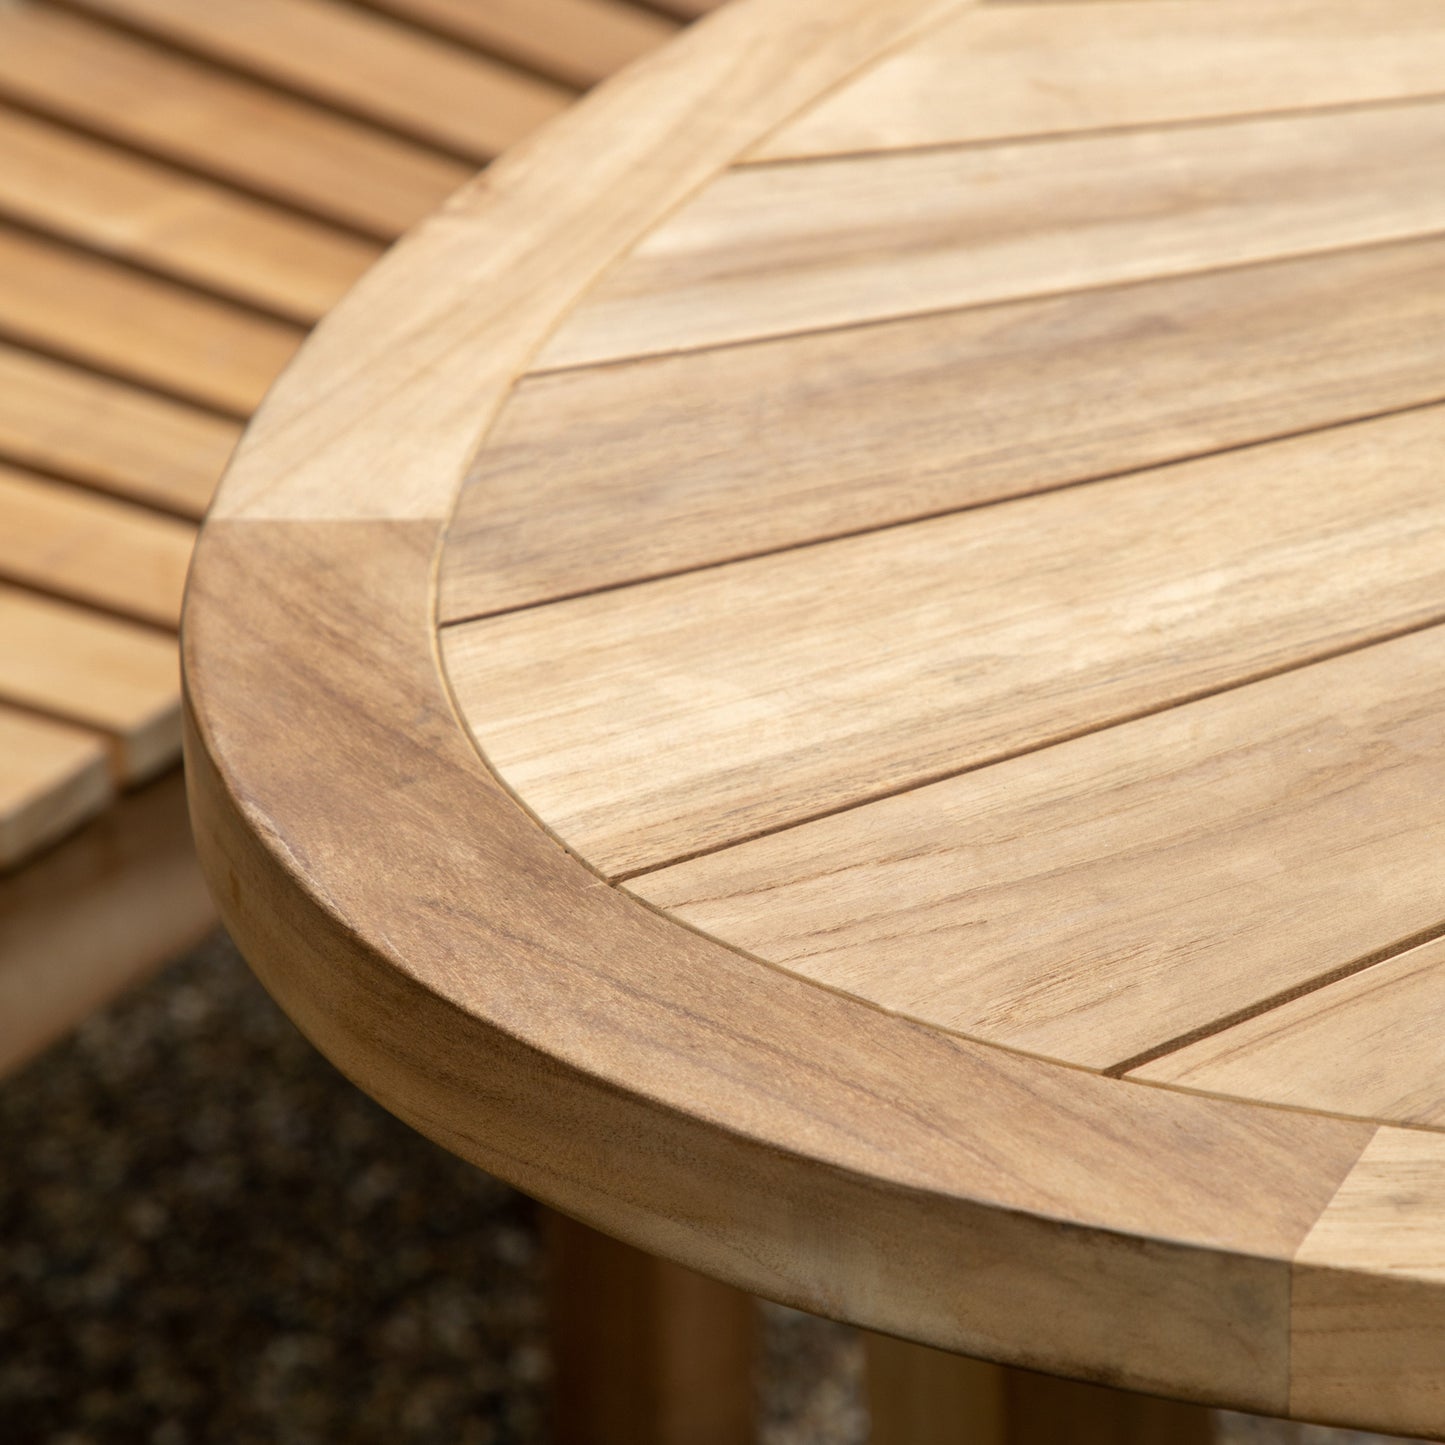 A close up of a Kikiathome.co.uk Ottery Dining Table 2400x1200x760mm and chairs, perfect for interior decor.